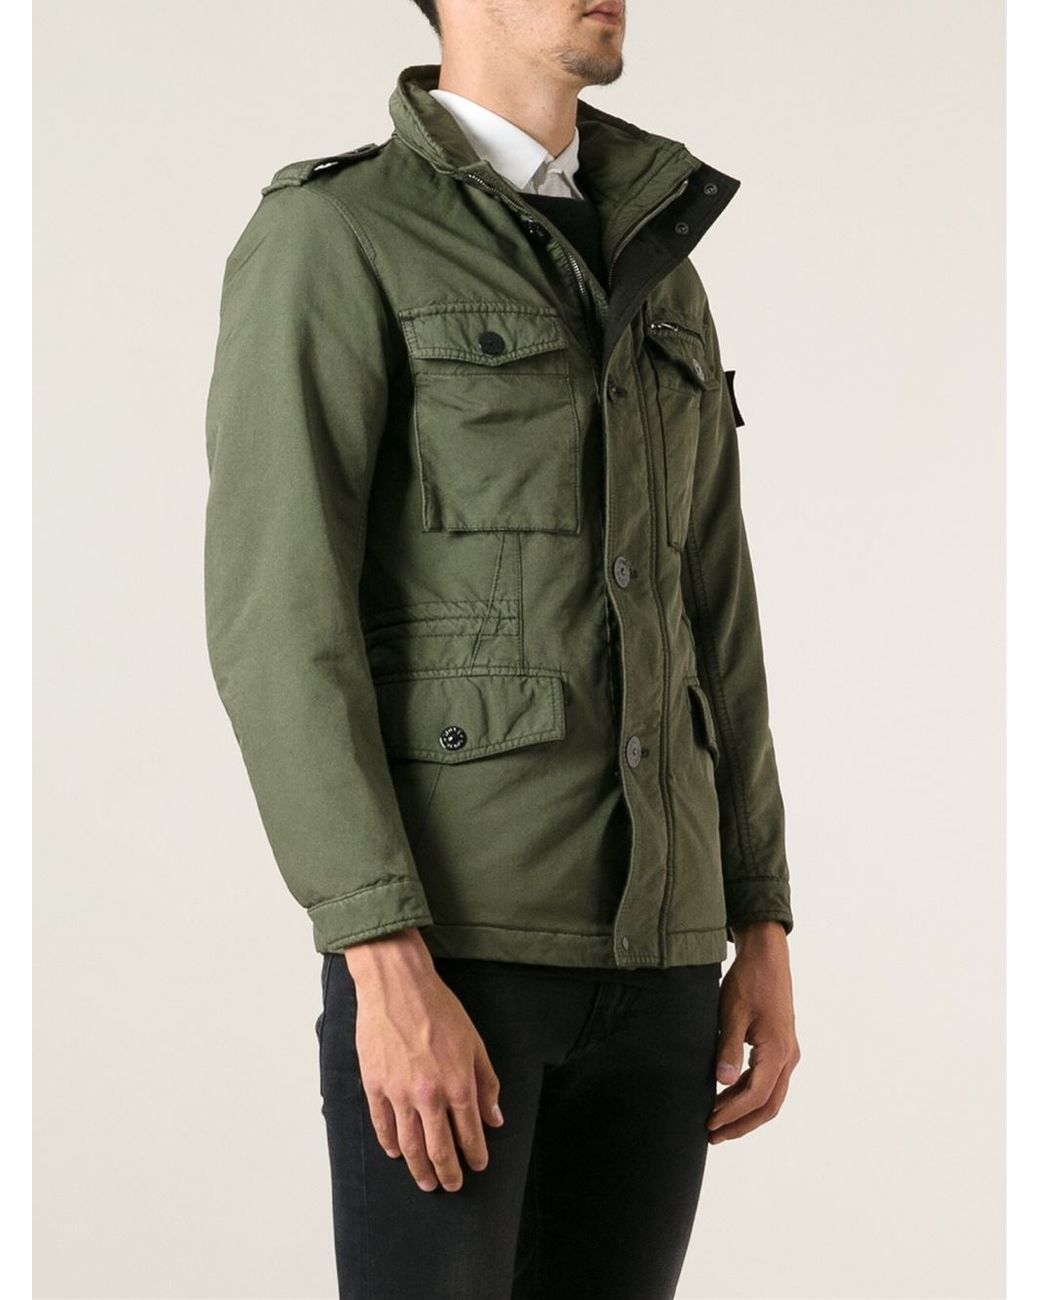 Stone Island Military Jacket in Green for Men | Lyst UK